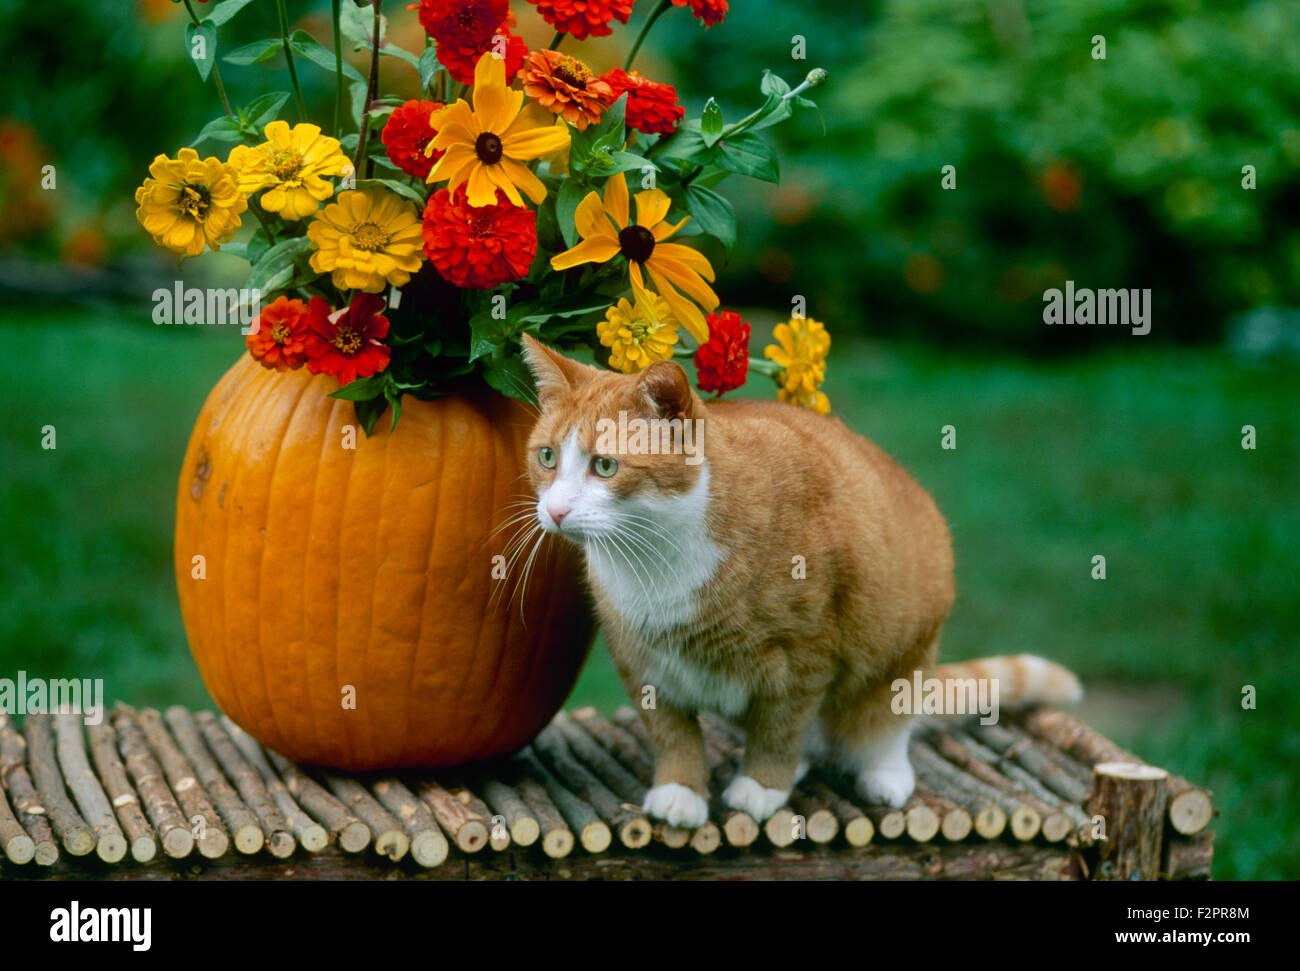 Fall harvest decoration on a bench with an orange tabby cat beside a pumpkin vase filled with late summer flowers on display, Missouri USA Stock Photo